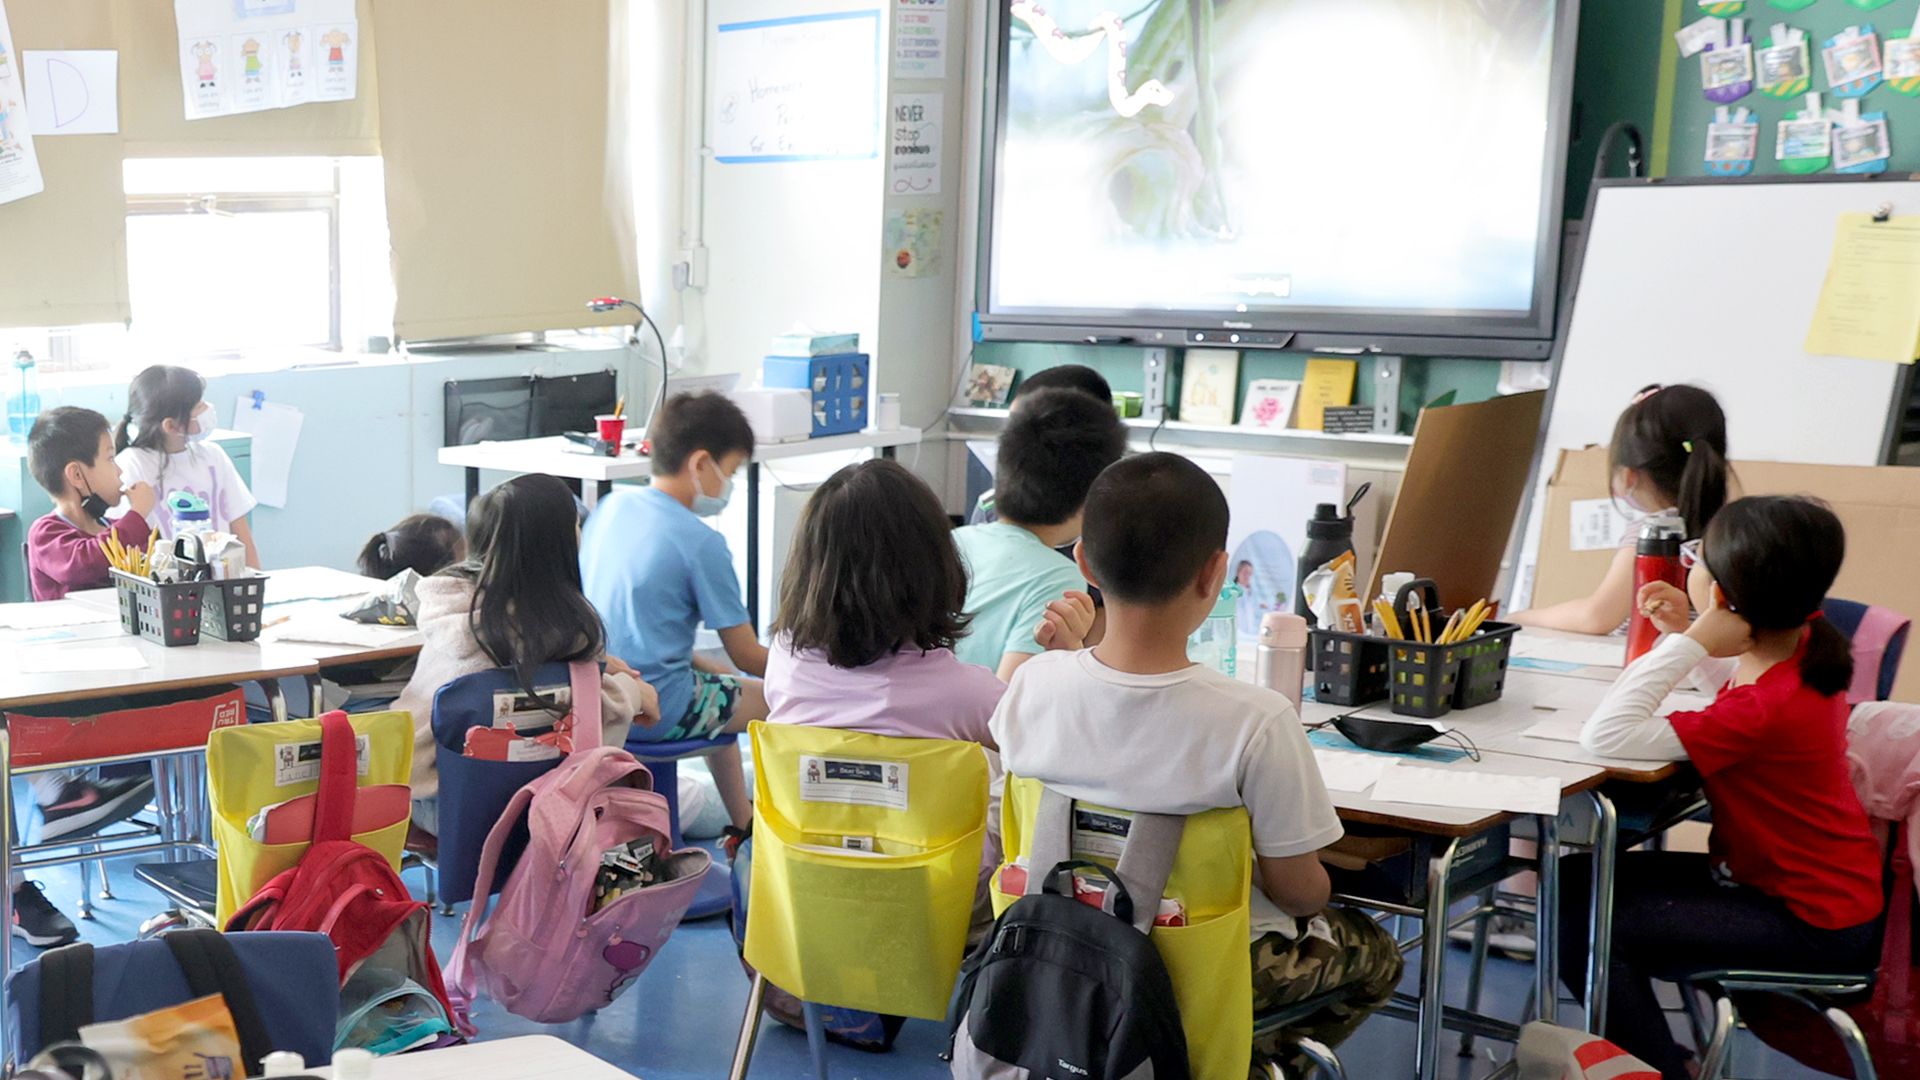 tudents attend class on the second to last day of school as New York City public schools prepare to wrap up the year at Yung Wing School P.S. 124 on June 24, 2022.